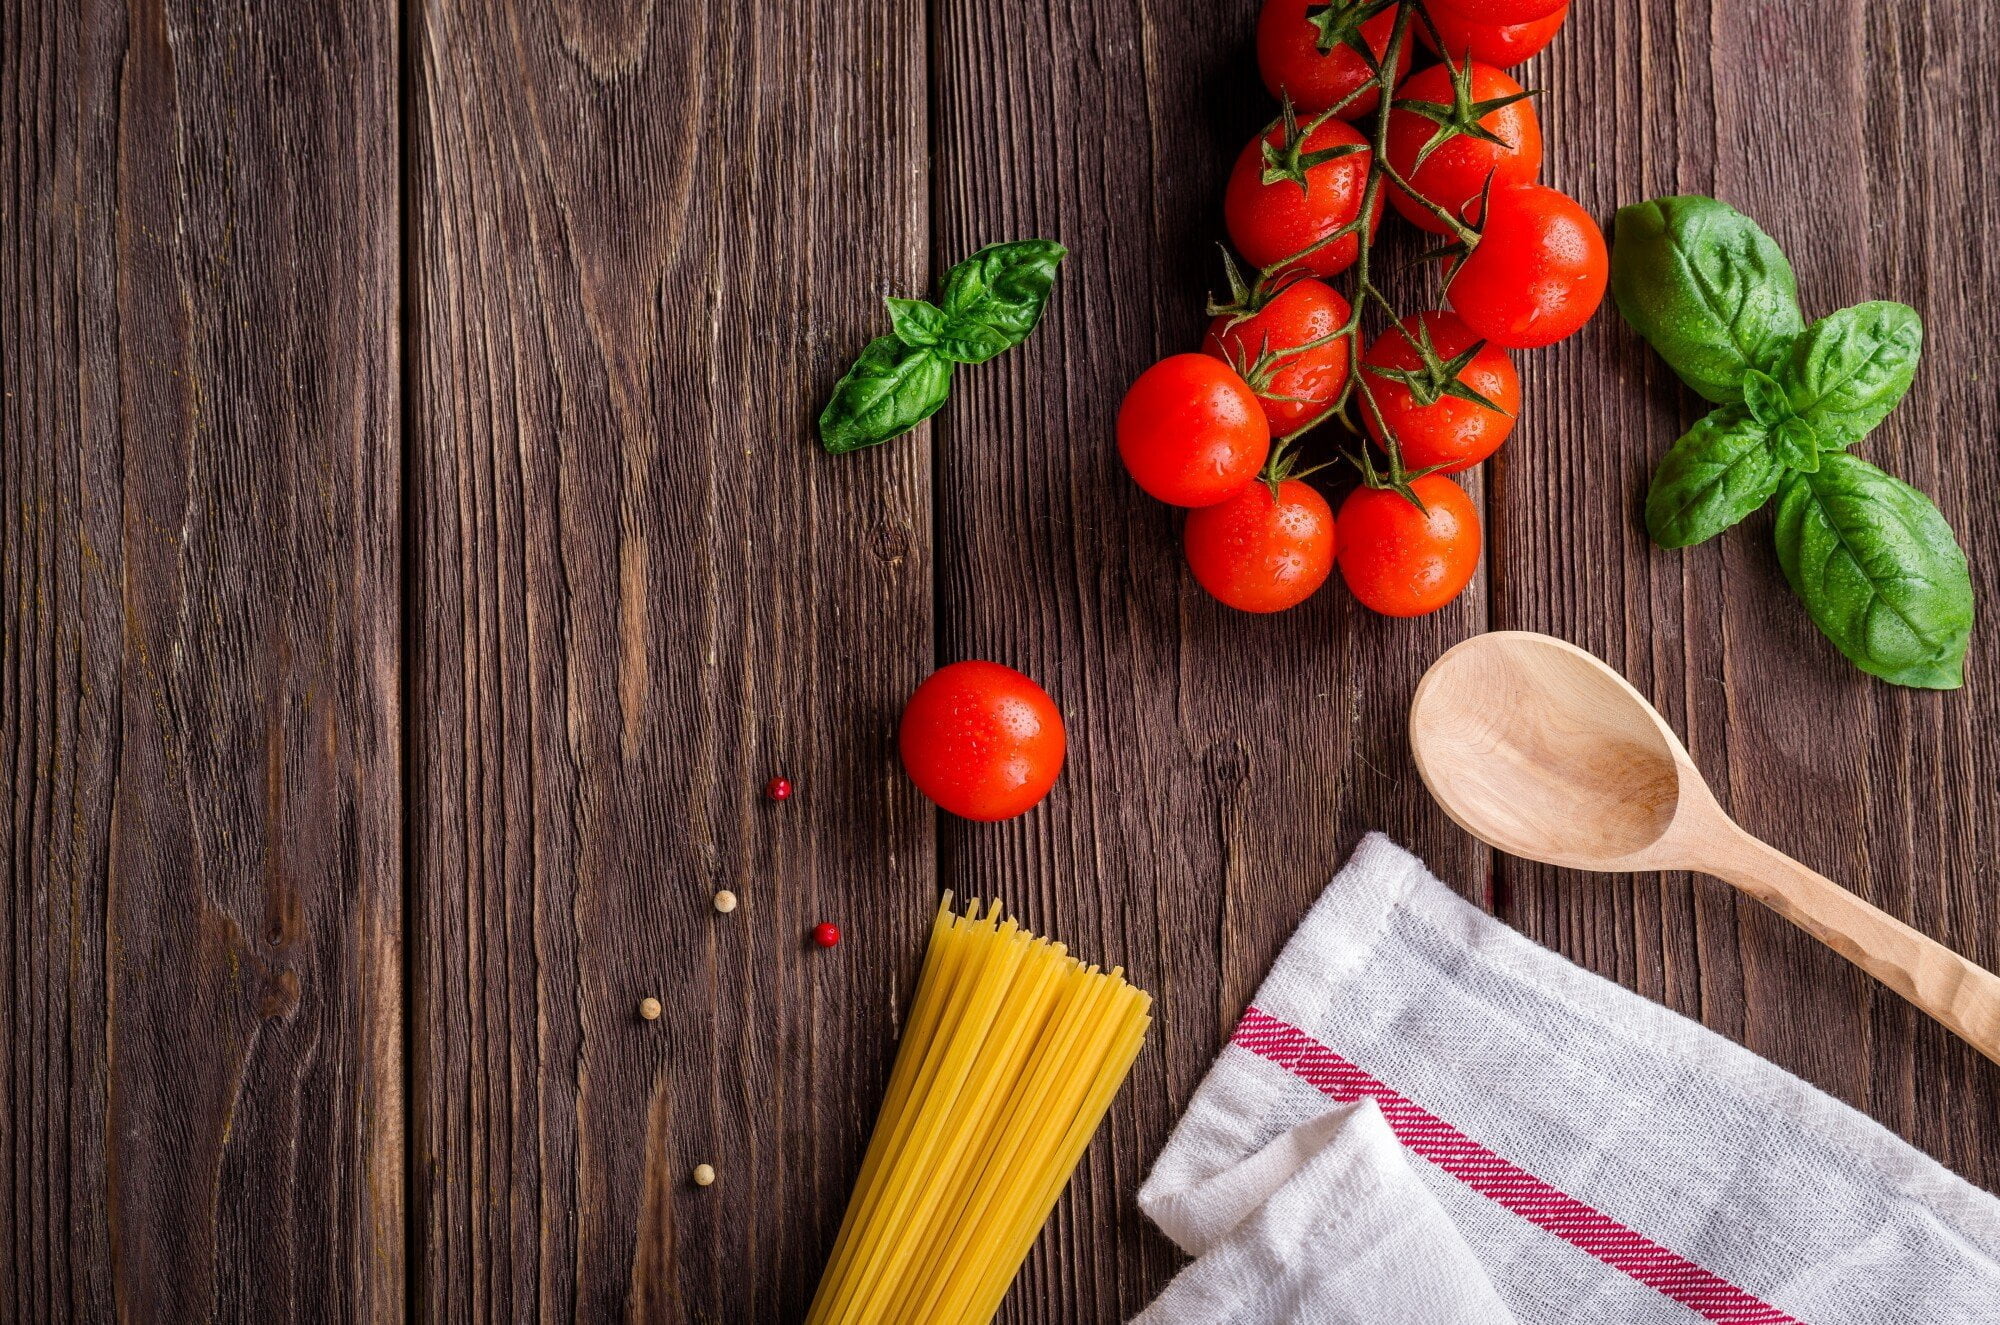 Healthy Italian Meals You’re Going to Love